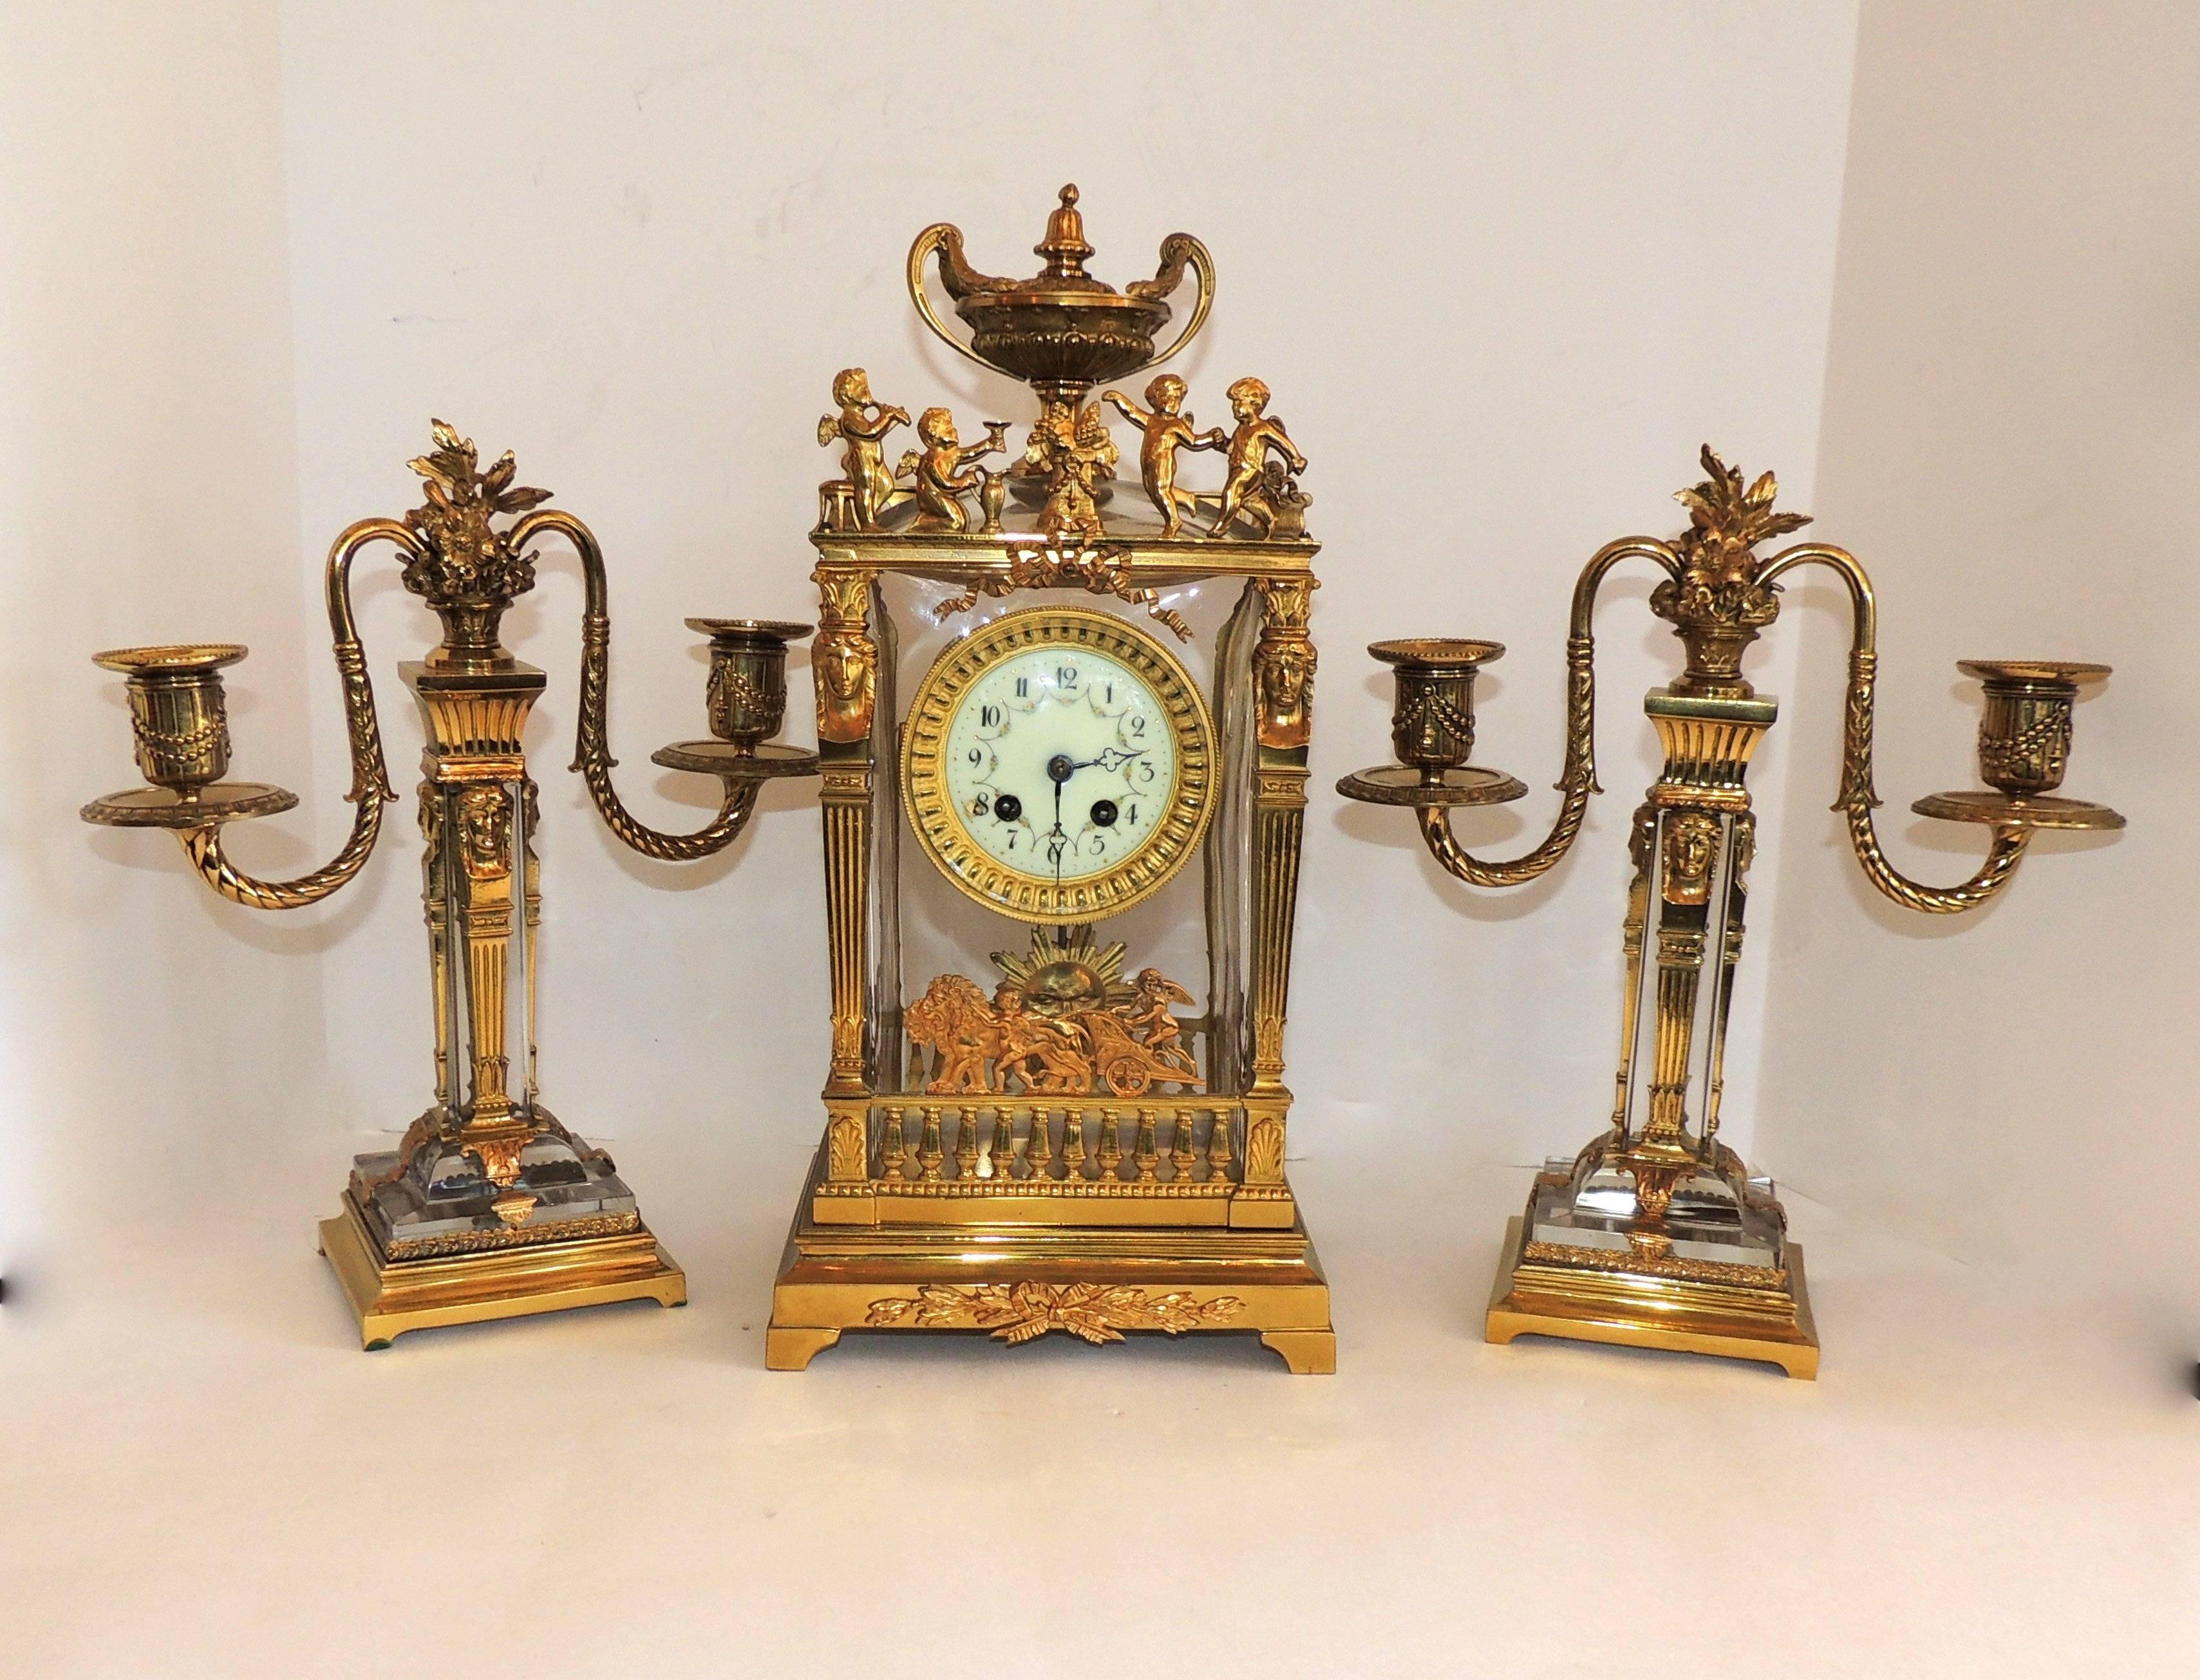 A wonderful Empire crystal clock with lots of details in the Dore Bronze of this three-piece clock set. The clock is surrounded by cherubs on both the top and bottom, with a smiling sun on the pendulum. Fluted detail is on both the candelabras and